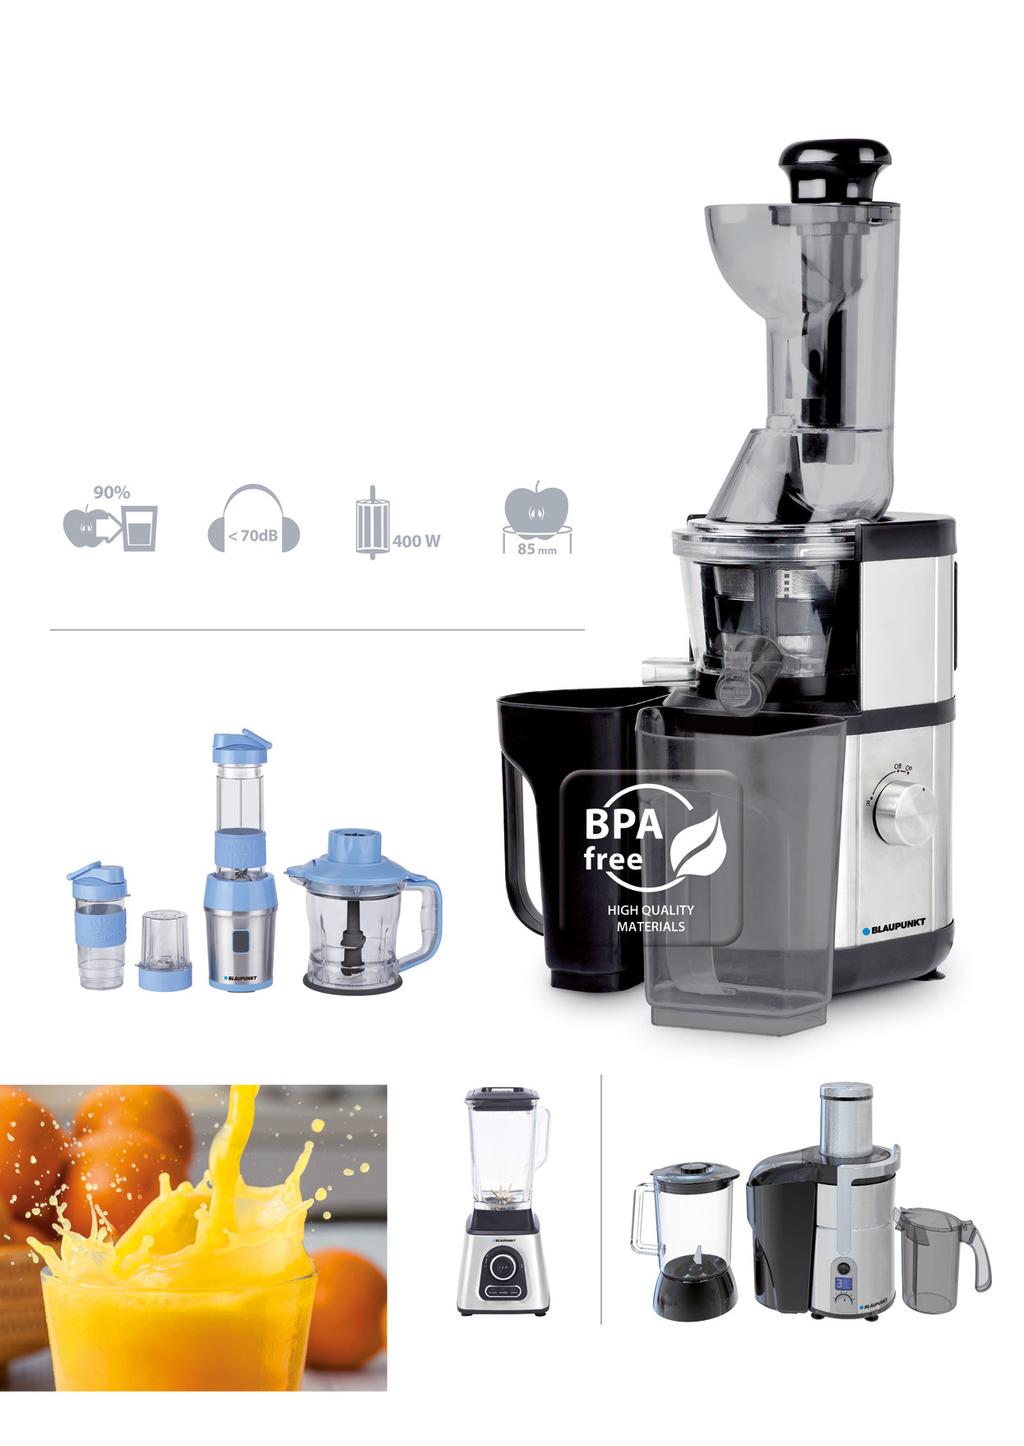 Slow juicer SJV601 Freshly squeezed juices are a rich source of vitamins and minerals which are necessary to create new cells and thus strengthen the immune system.